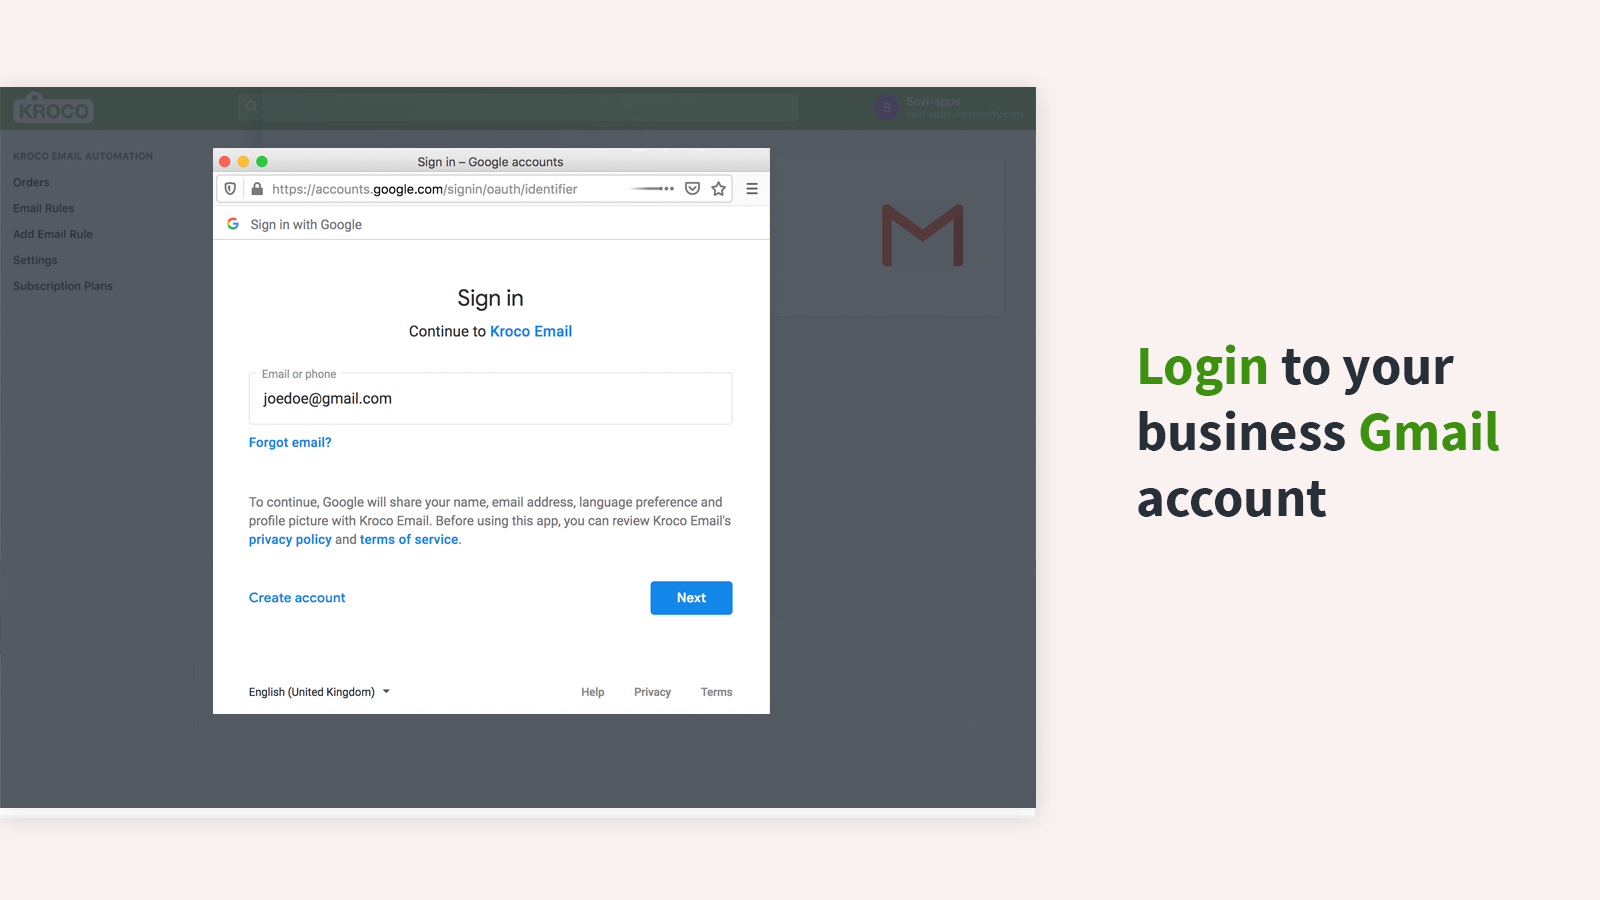 Login to your business email account